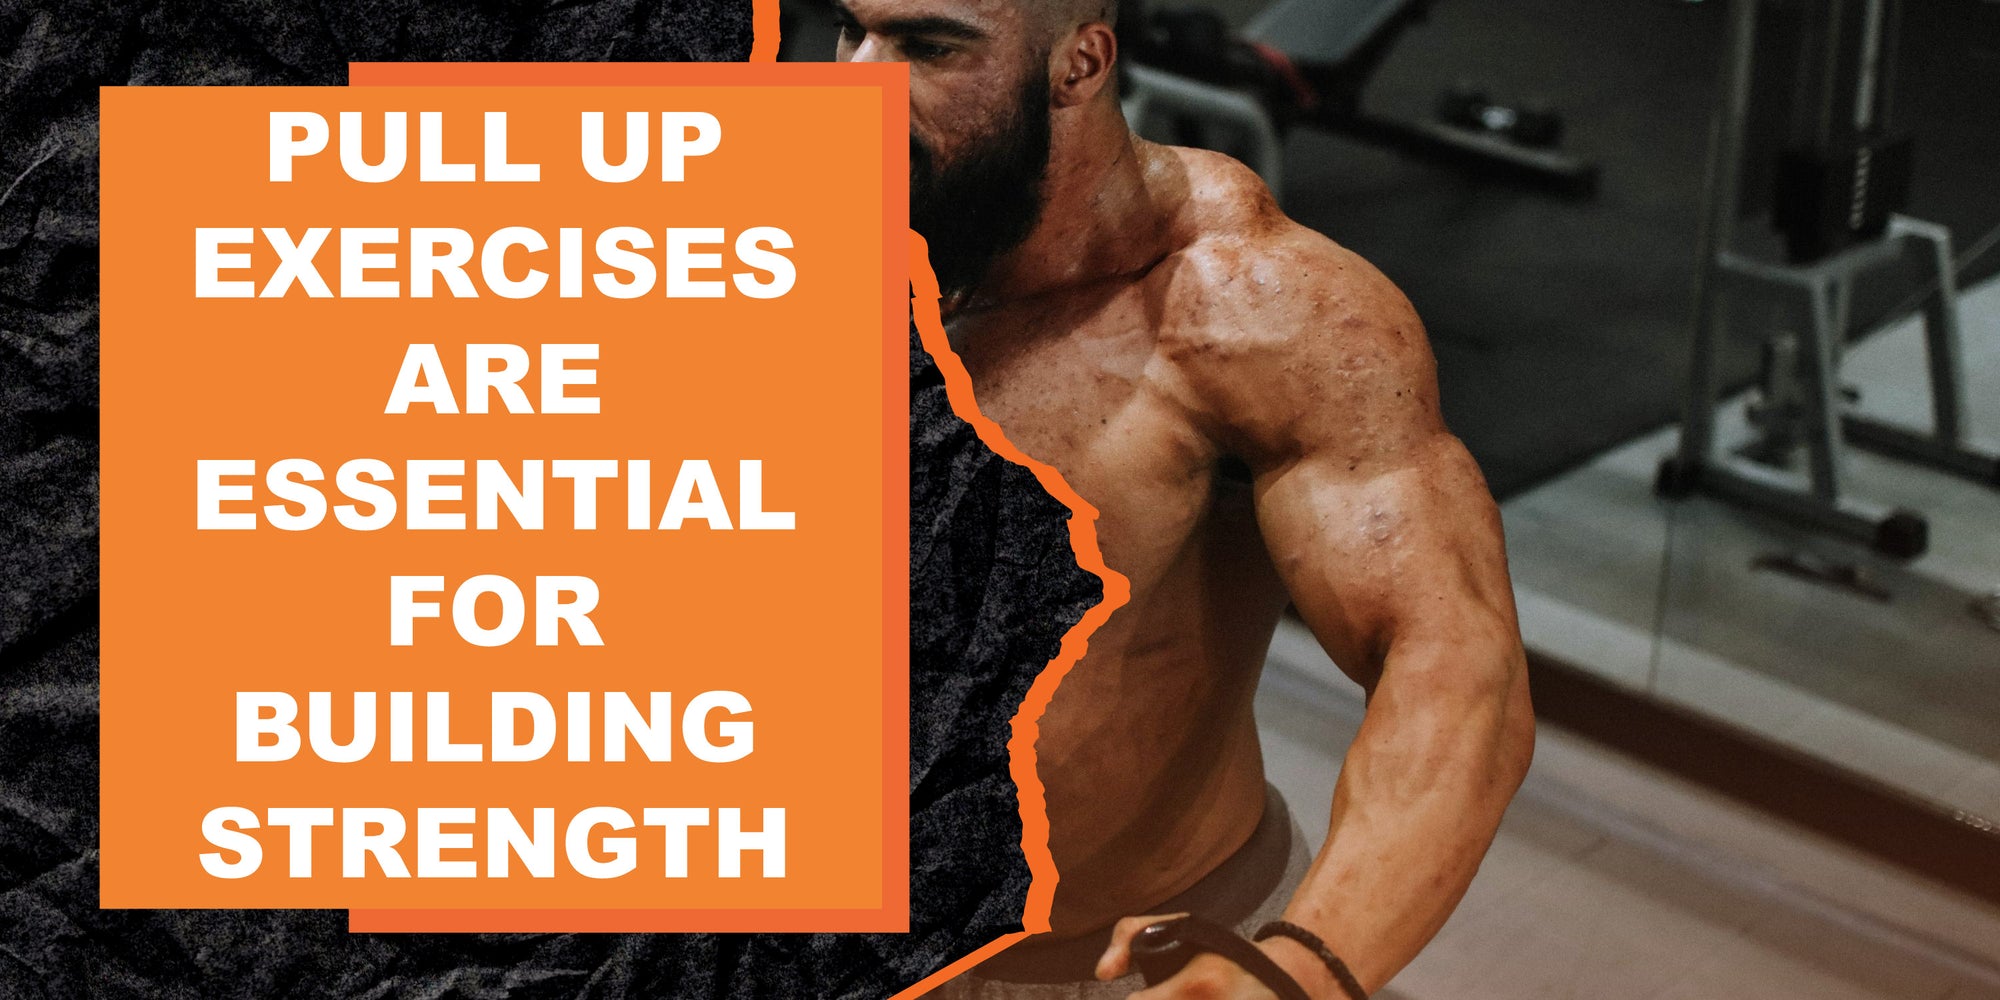 10 Reasons Pull Up Exercises Are Essential for Building Strength